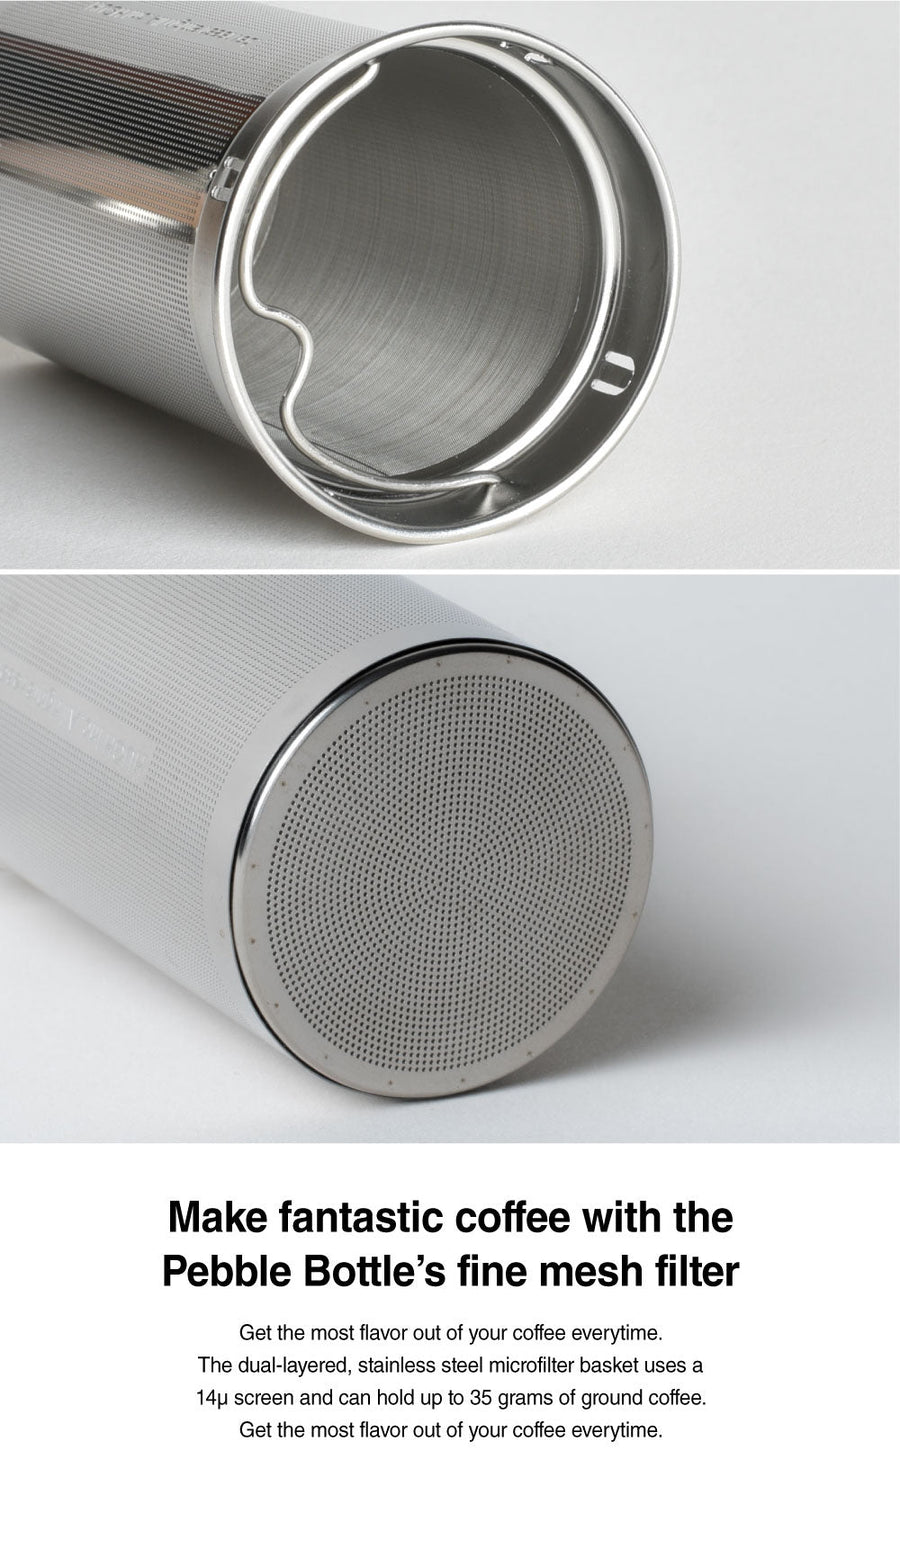 Make fantastic coffee with the Pebble Bottles's fine mesh filter